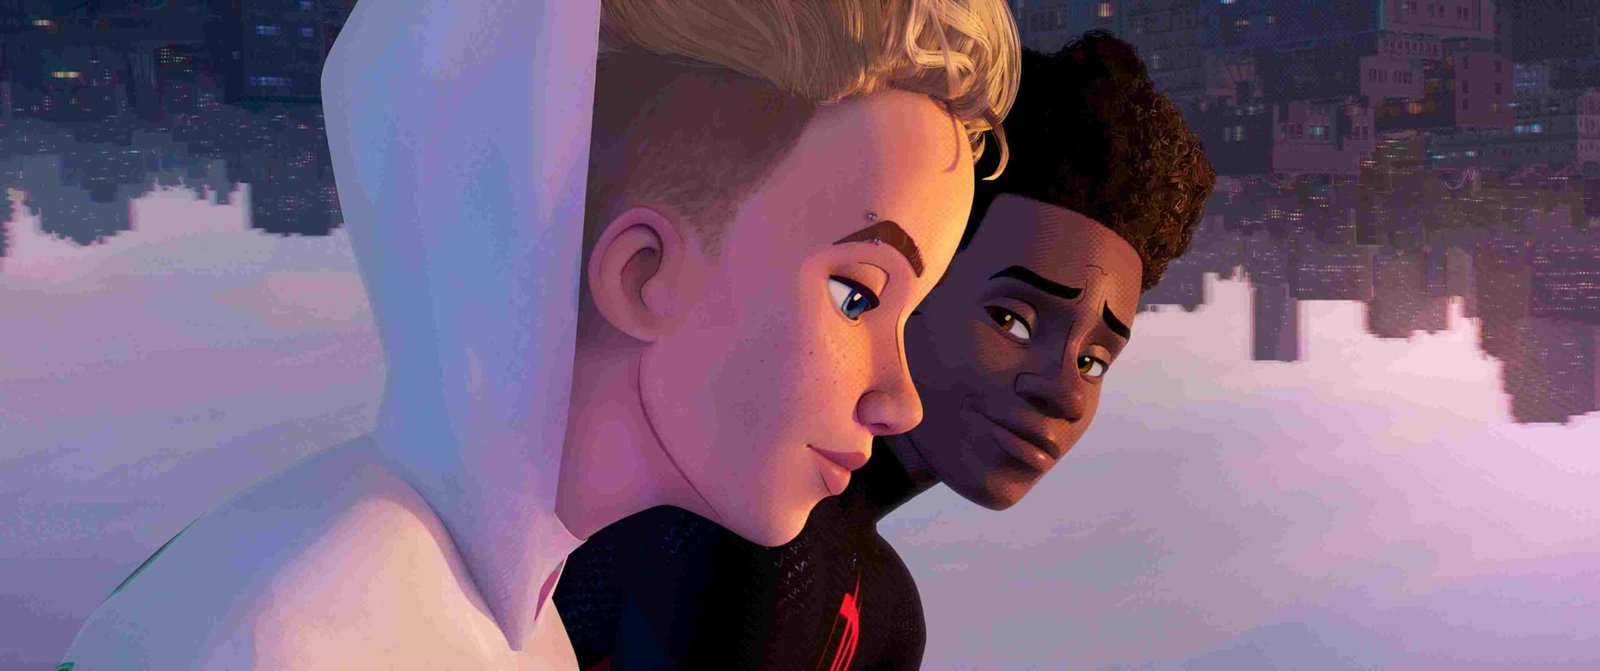 Spider-Man: Across the Spider-Verse recensione HavocPoint Miles Morales e Gwen Stacy